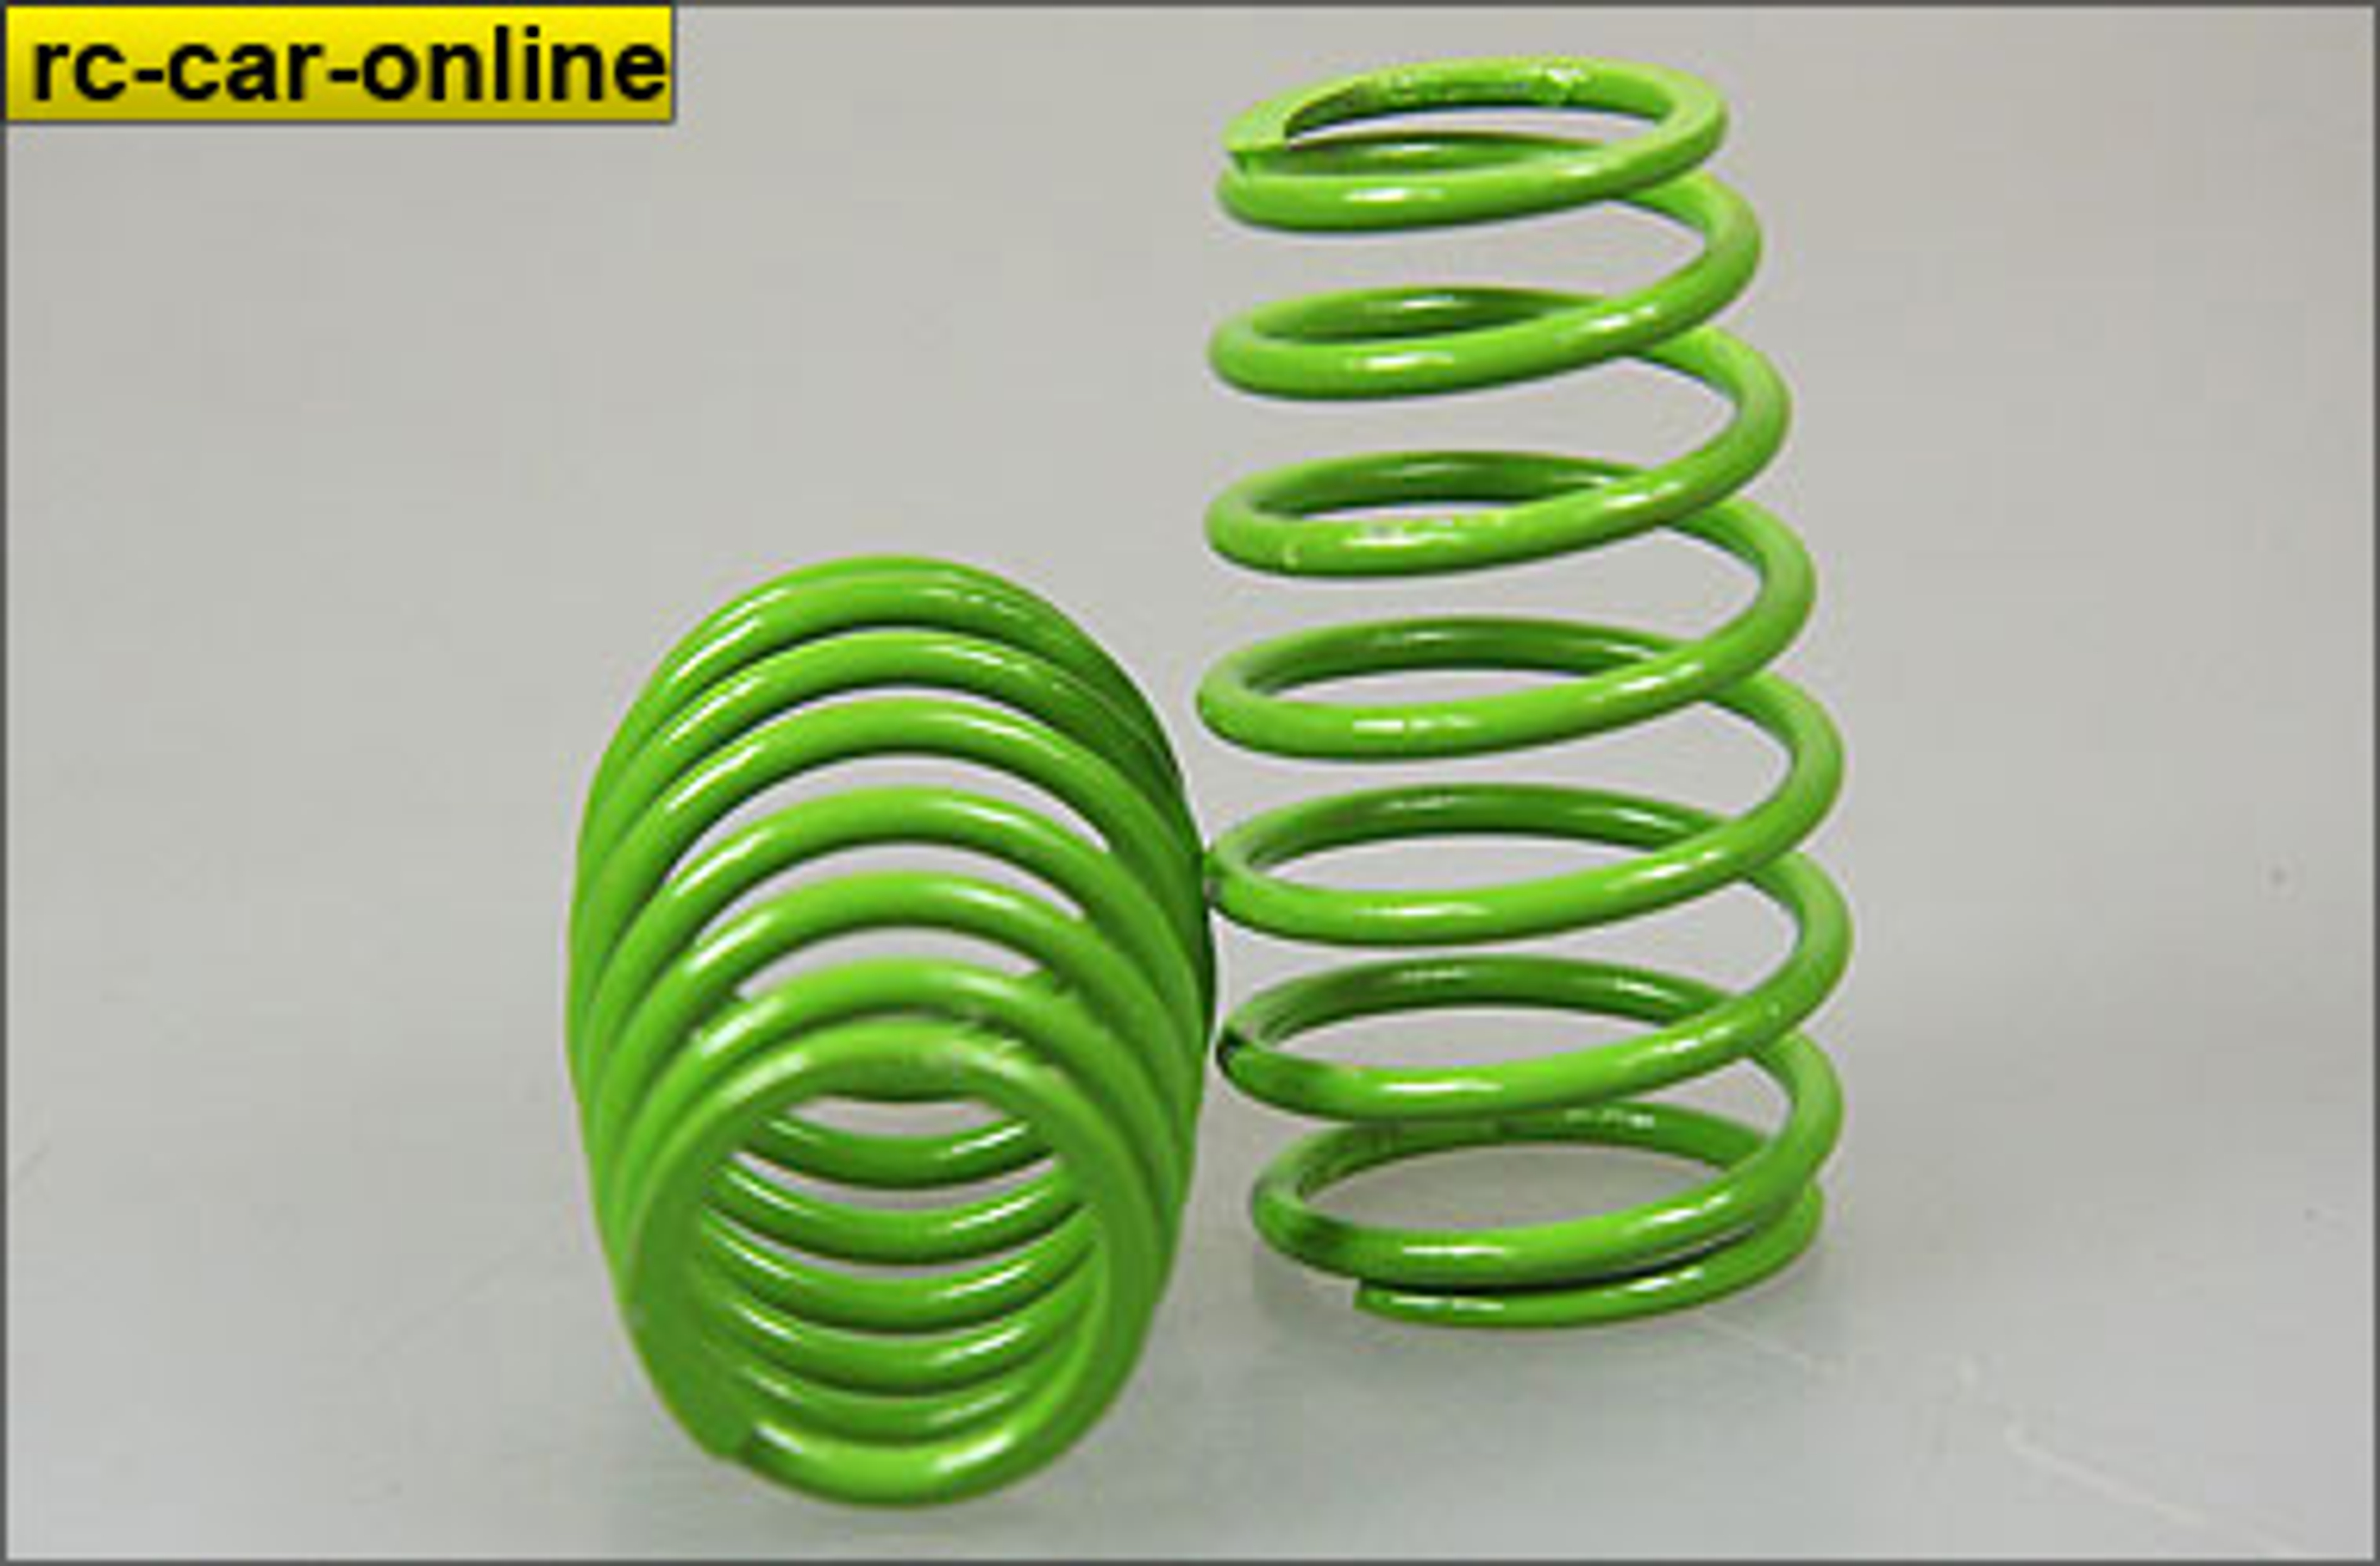 y0453 HT Cask shaped springs for Mecatech Klick-Shocks and Big Bore, green 2,5 mm